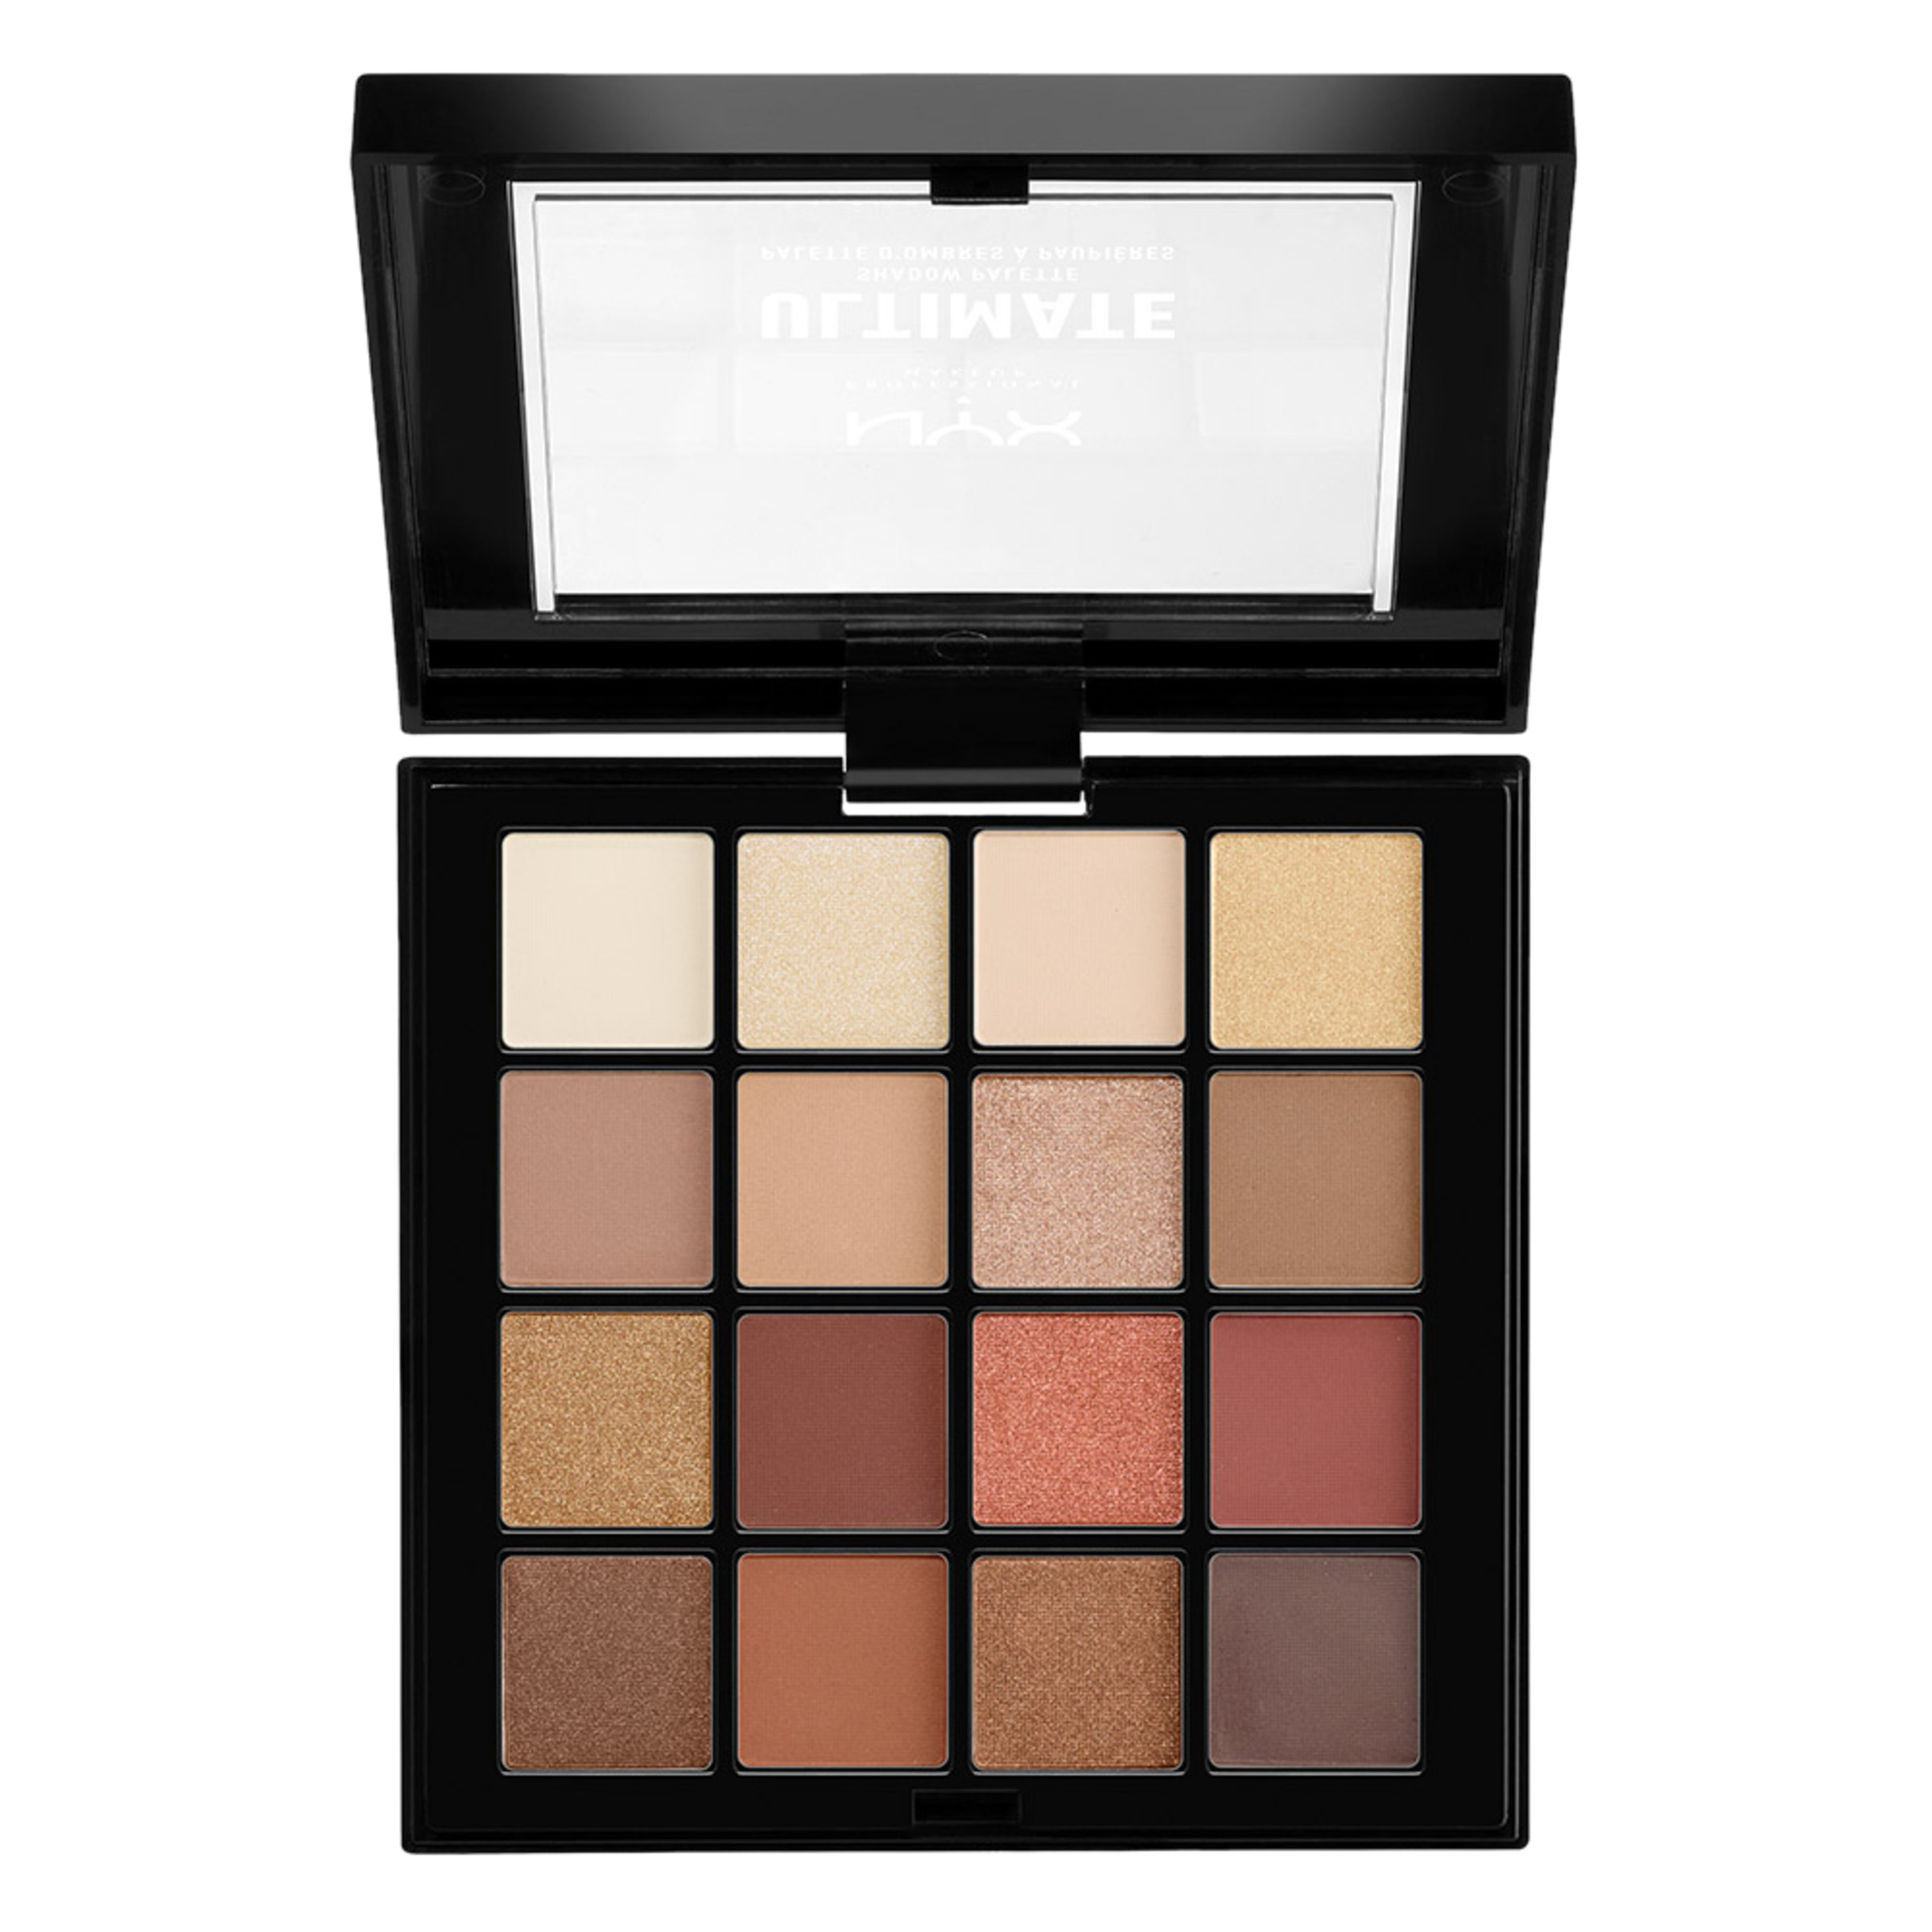 NYX Professional Makeup Ultimate Eye Shadow Palette, Warm Neutrals, 0.32 oz - image 6 of 10